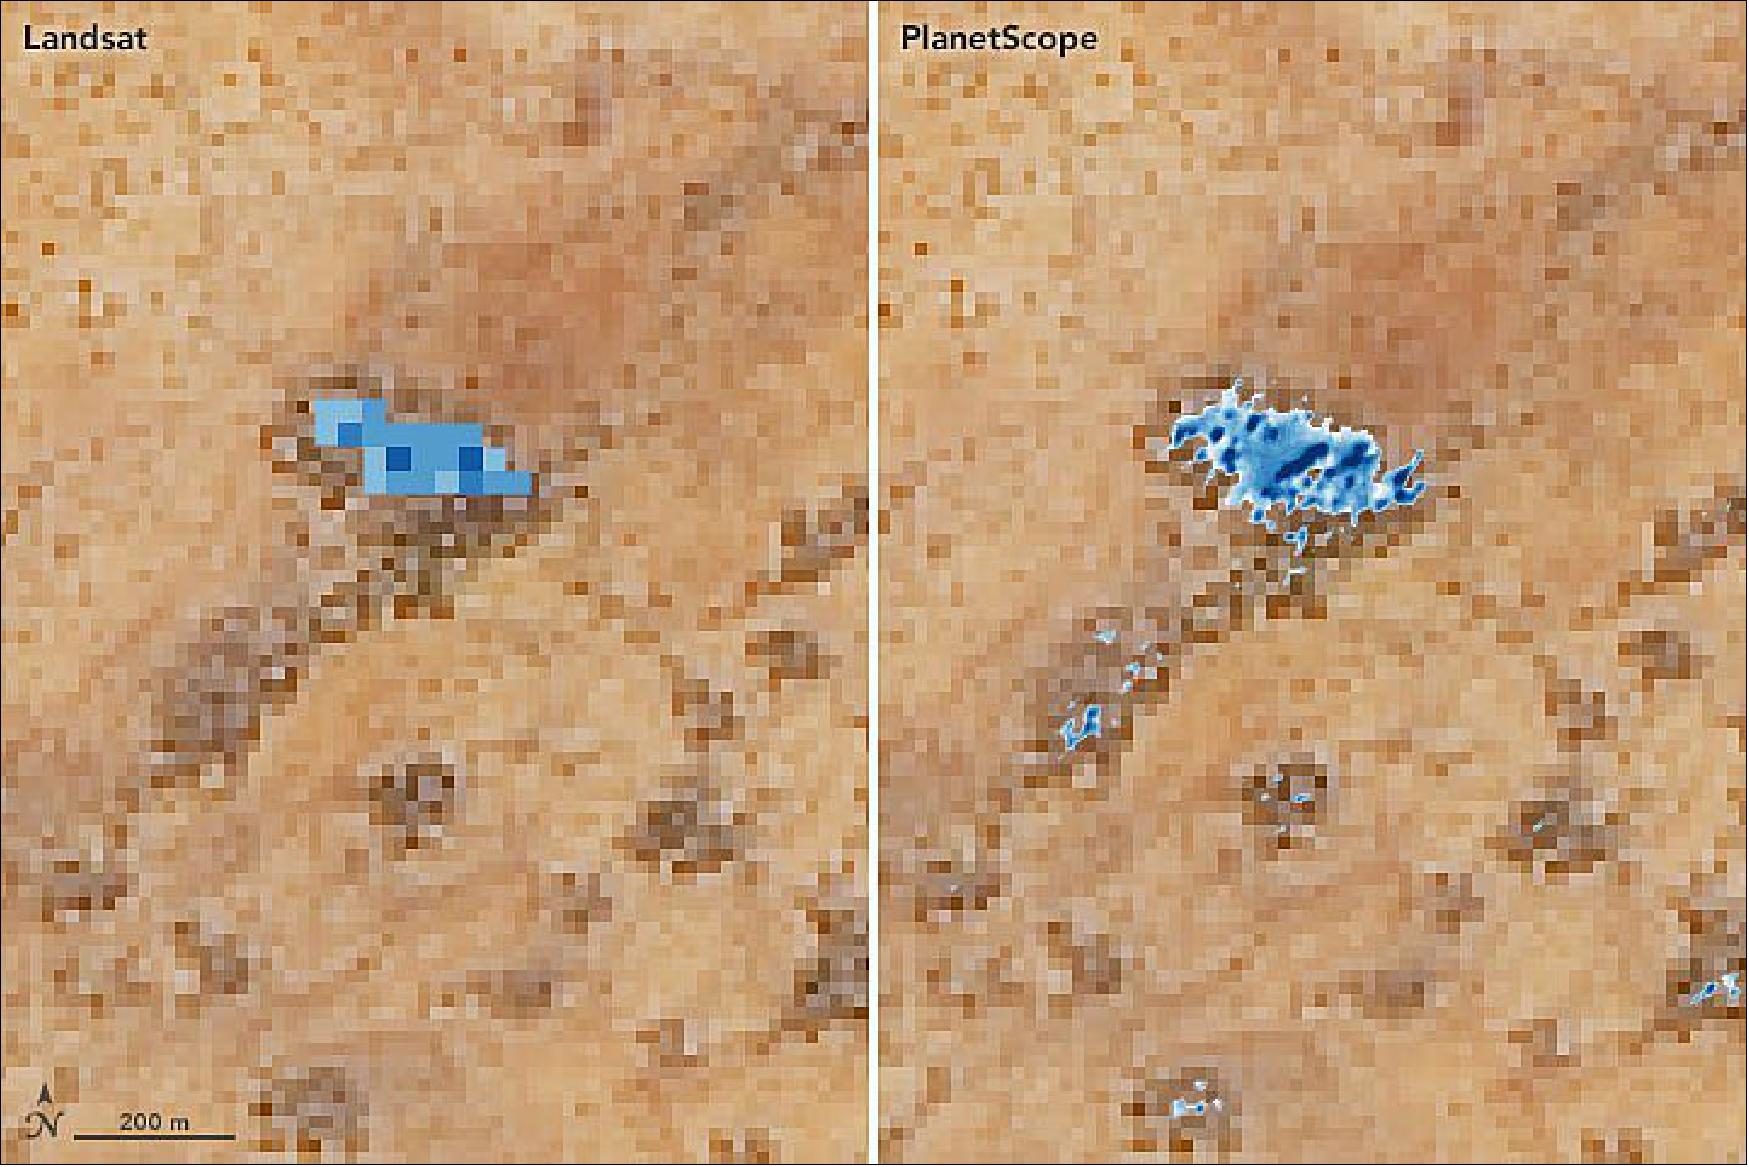 Figure 68: This data visualization shows how Landsat-8 (left) and PlanetScope (right) infrared observations allow researchers to find water that is otherwise hard to spot (image credit: NASA Earth Observatory)